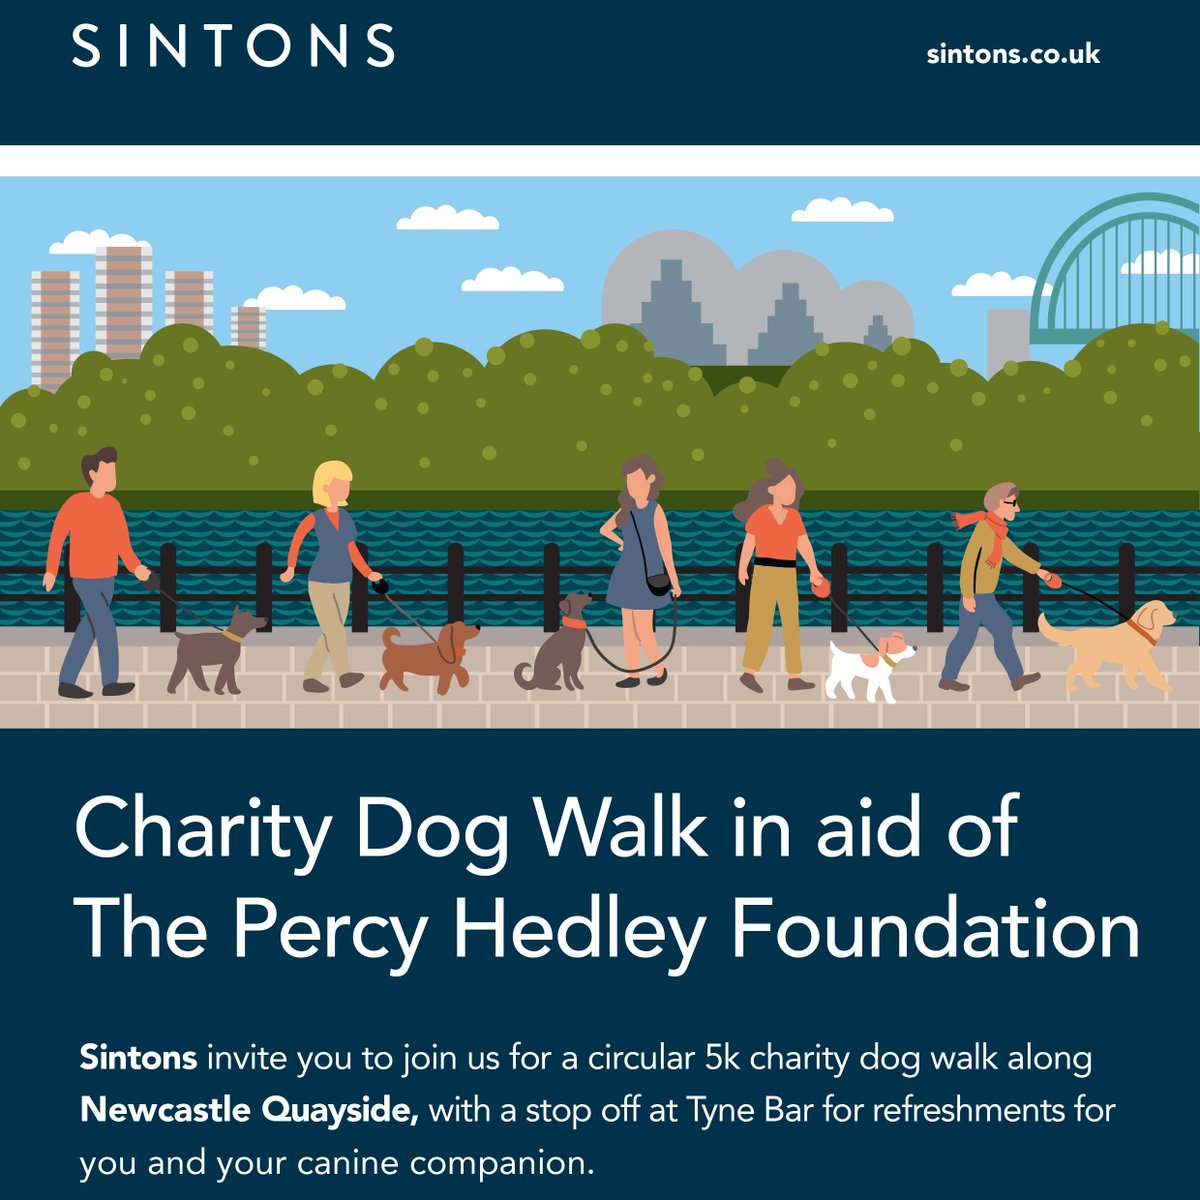 Join us for a circular 5k charity dog walk along Newcastle Quayside, with a stop off at @thetynebar for refreshments for you and your canine companion @percyhedley @Edwards_Cait1 @melissac2707 Click here to register tinyurl.com/mszdud5d #charity #newcastle #quayside